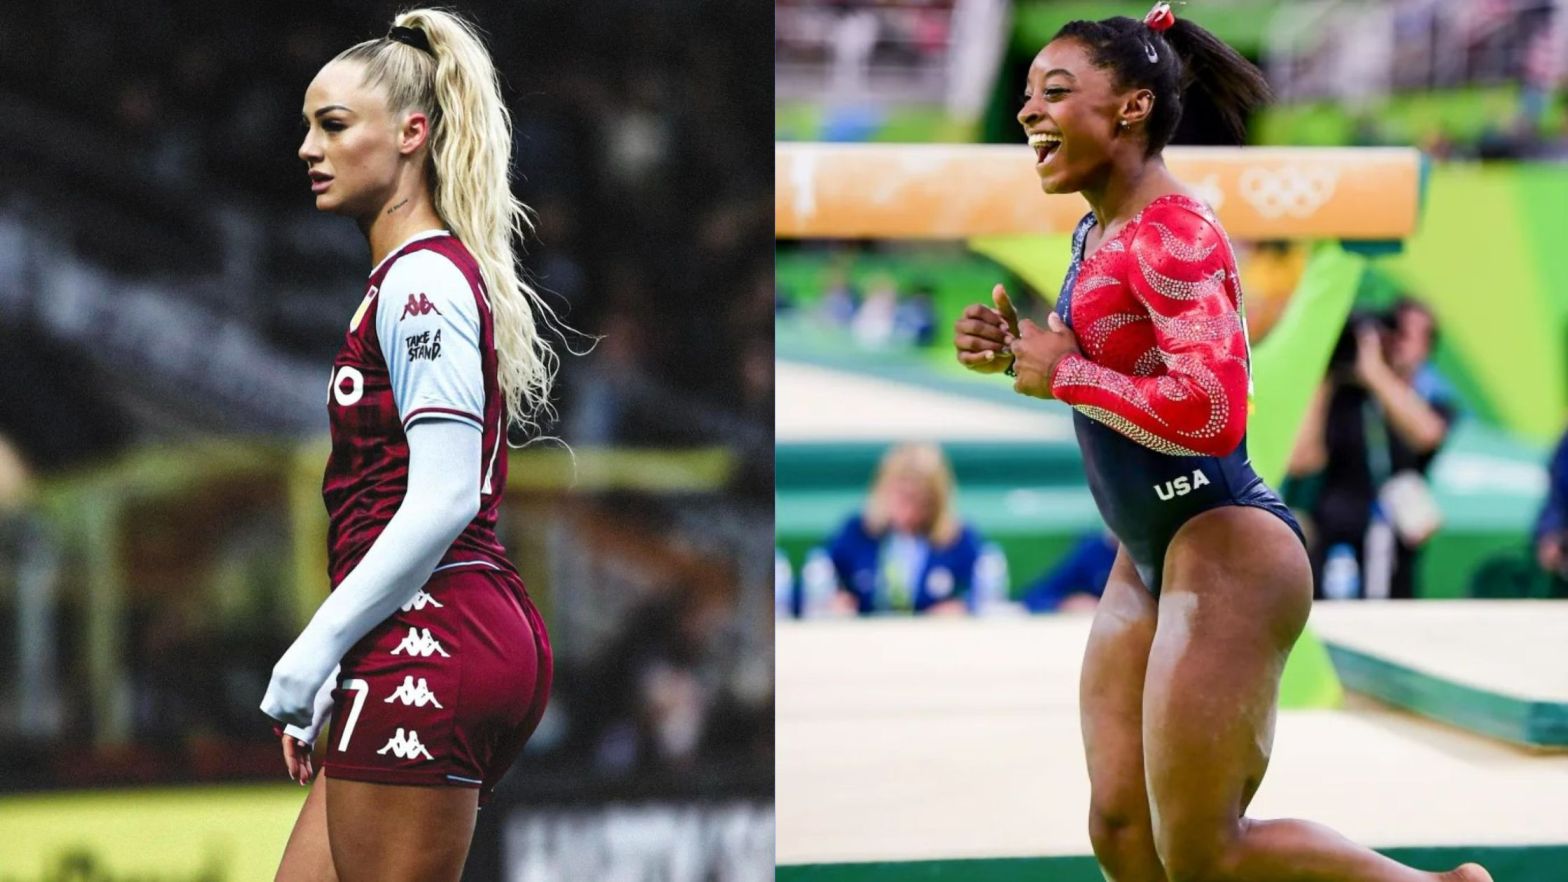 These Are the Top 10 Famous Sports Women | Female Athletes in the World